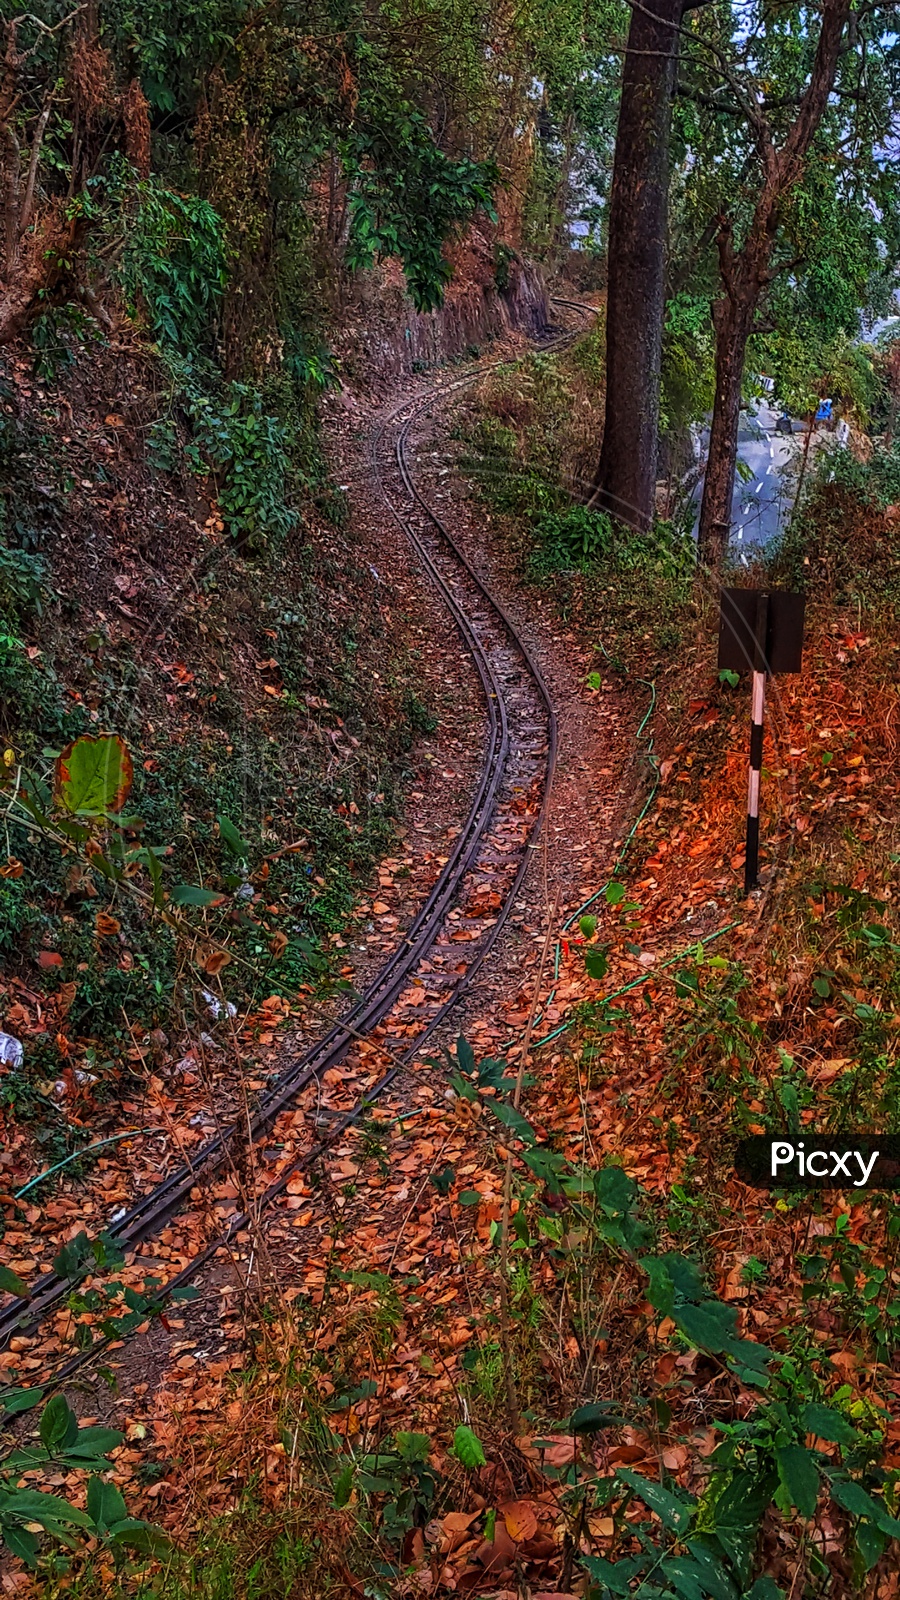 The toy train track of Darjeeling bends through the dense forest